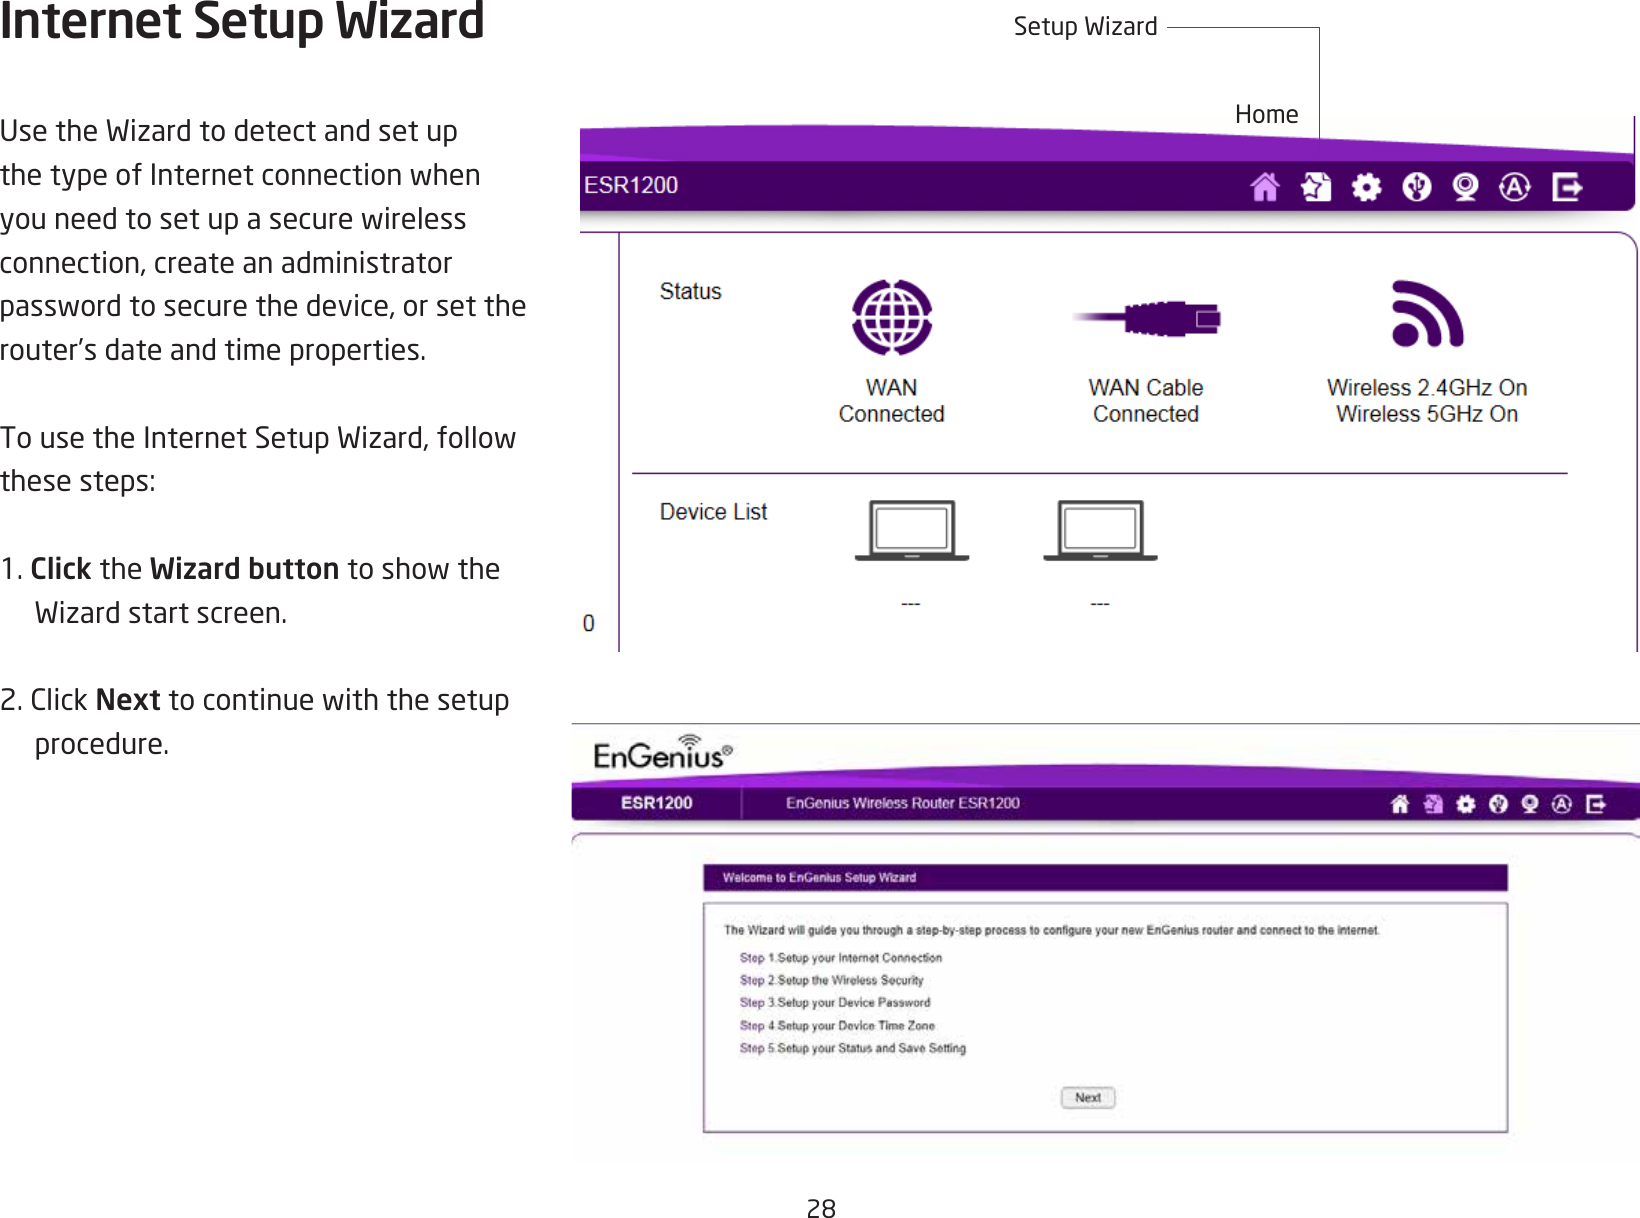 28Internet Setup WizardUsetheWizardtodetectandsetupthetypeofInternetconnectionwhenyouneedtosetupasecurewirelessconnection, create an administrator passwordtosecurethedevice,orsettherouter’s date and time properties.TousetheInternetSetupWizard,followthesesteps:1. Click the Wizard buttontoshowtheWizardstartscreen.2.ClickNexttocontinuewiththesetupprocedure.HomeSetupWizard